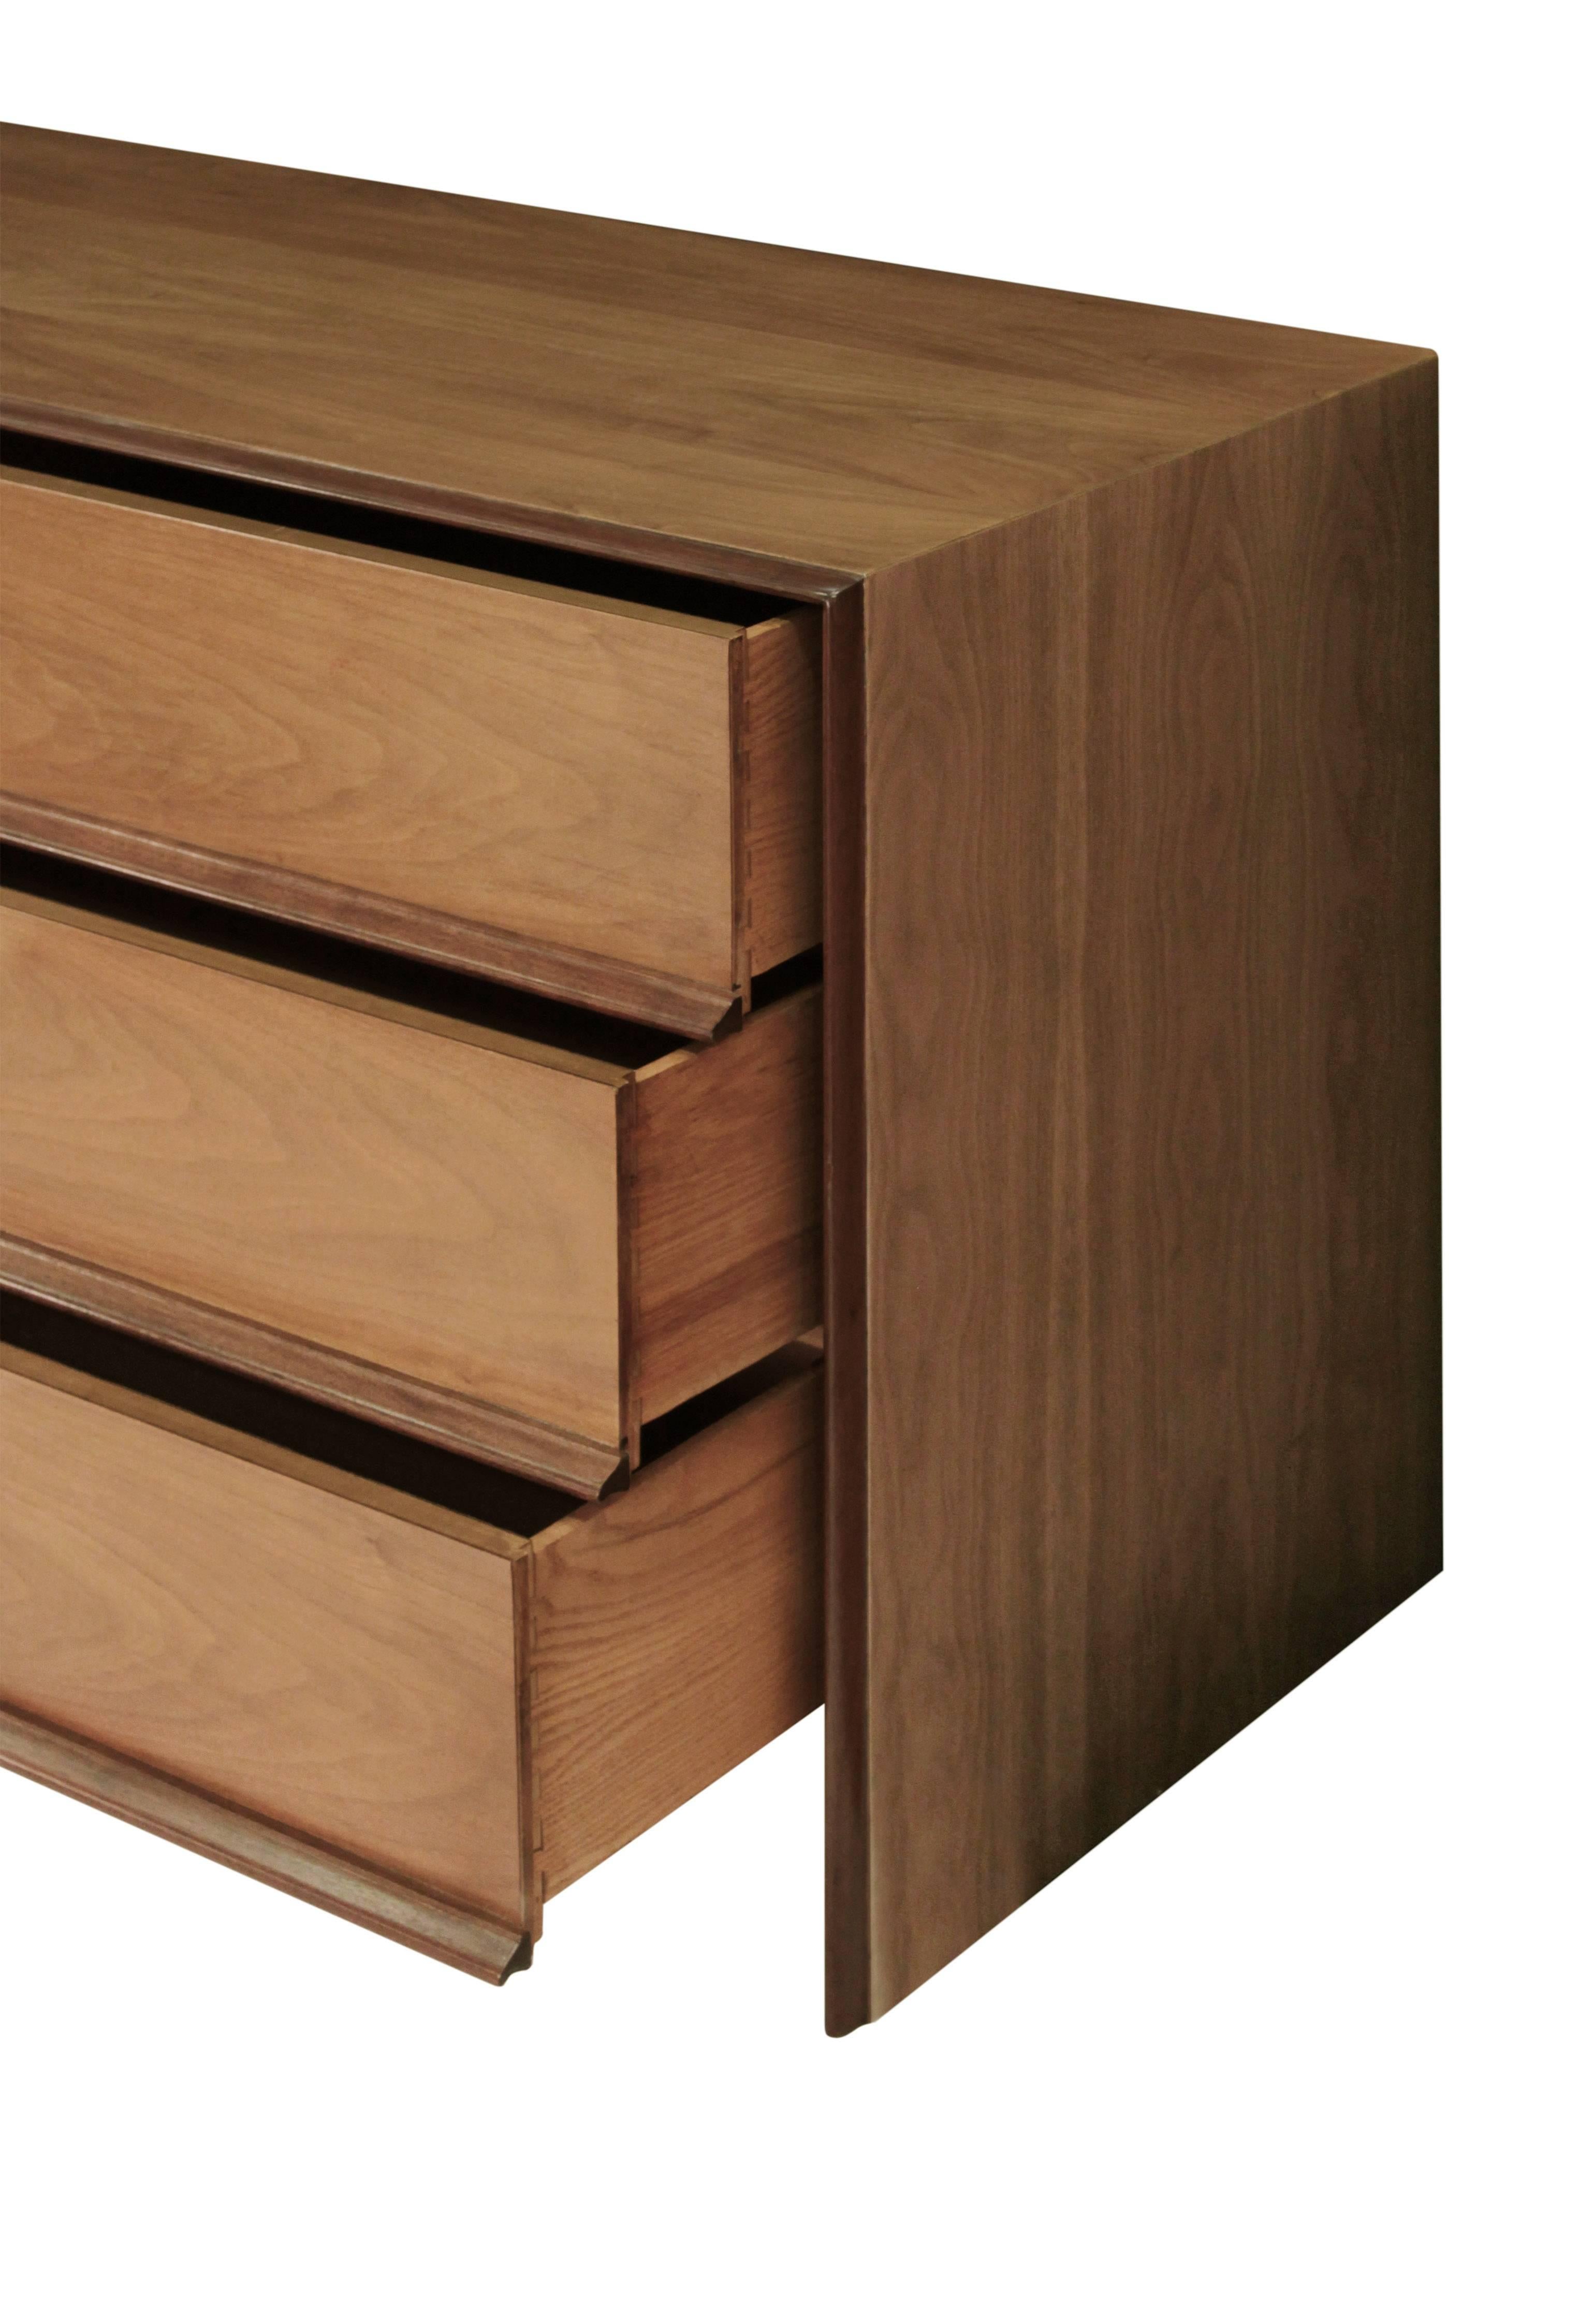 Chest of drawers No. 5039 in walnut by T.H. Robsjohn-Gibbings for Widdicomb, American, 1950s (label in drawer 